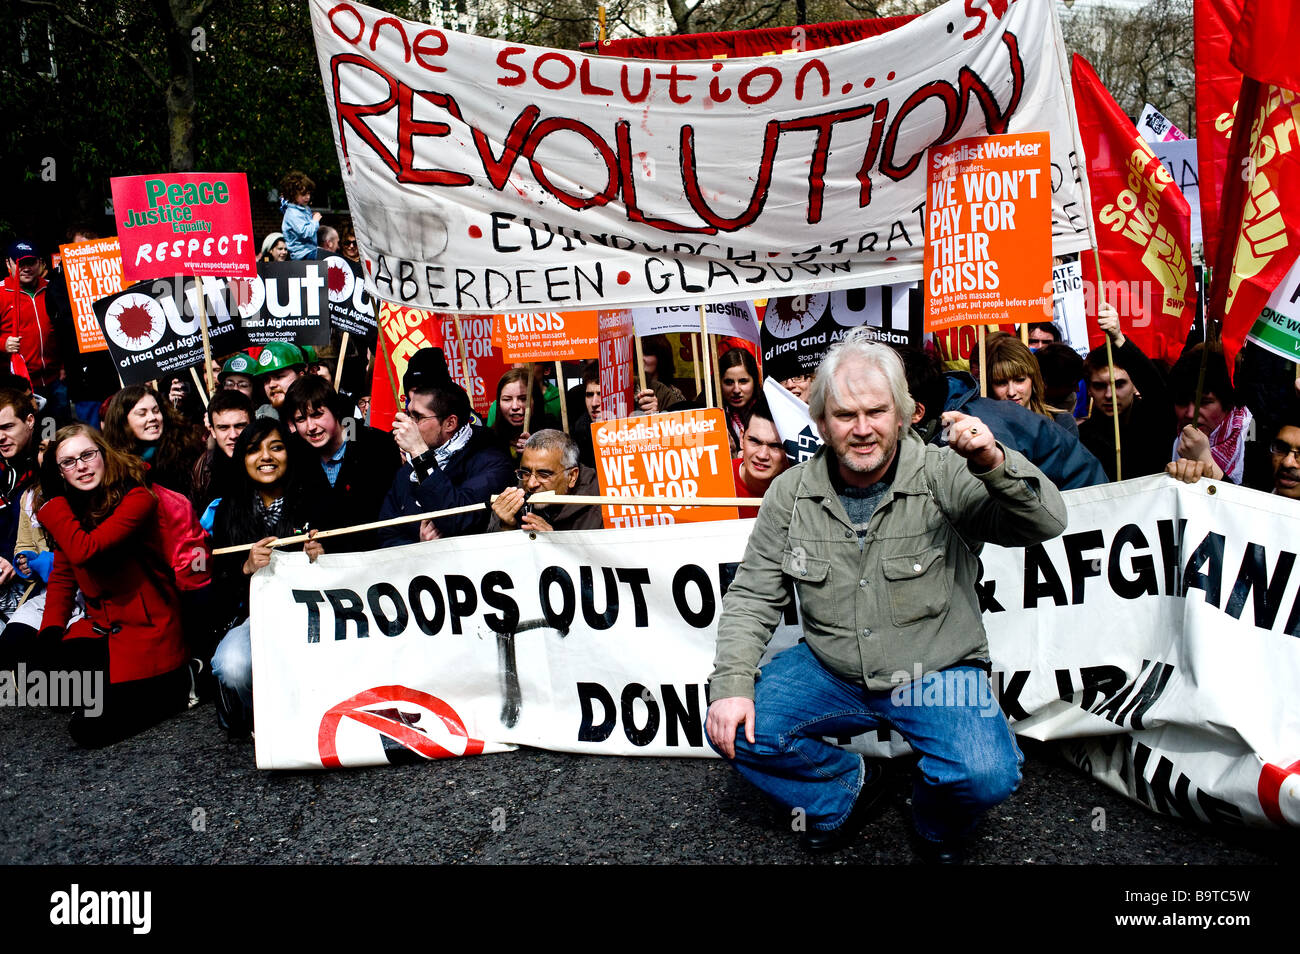 Protesters at a peace demonstration in London. Stock Photo